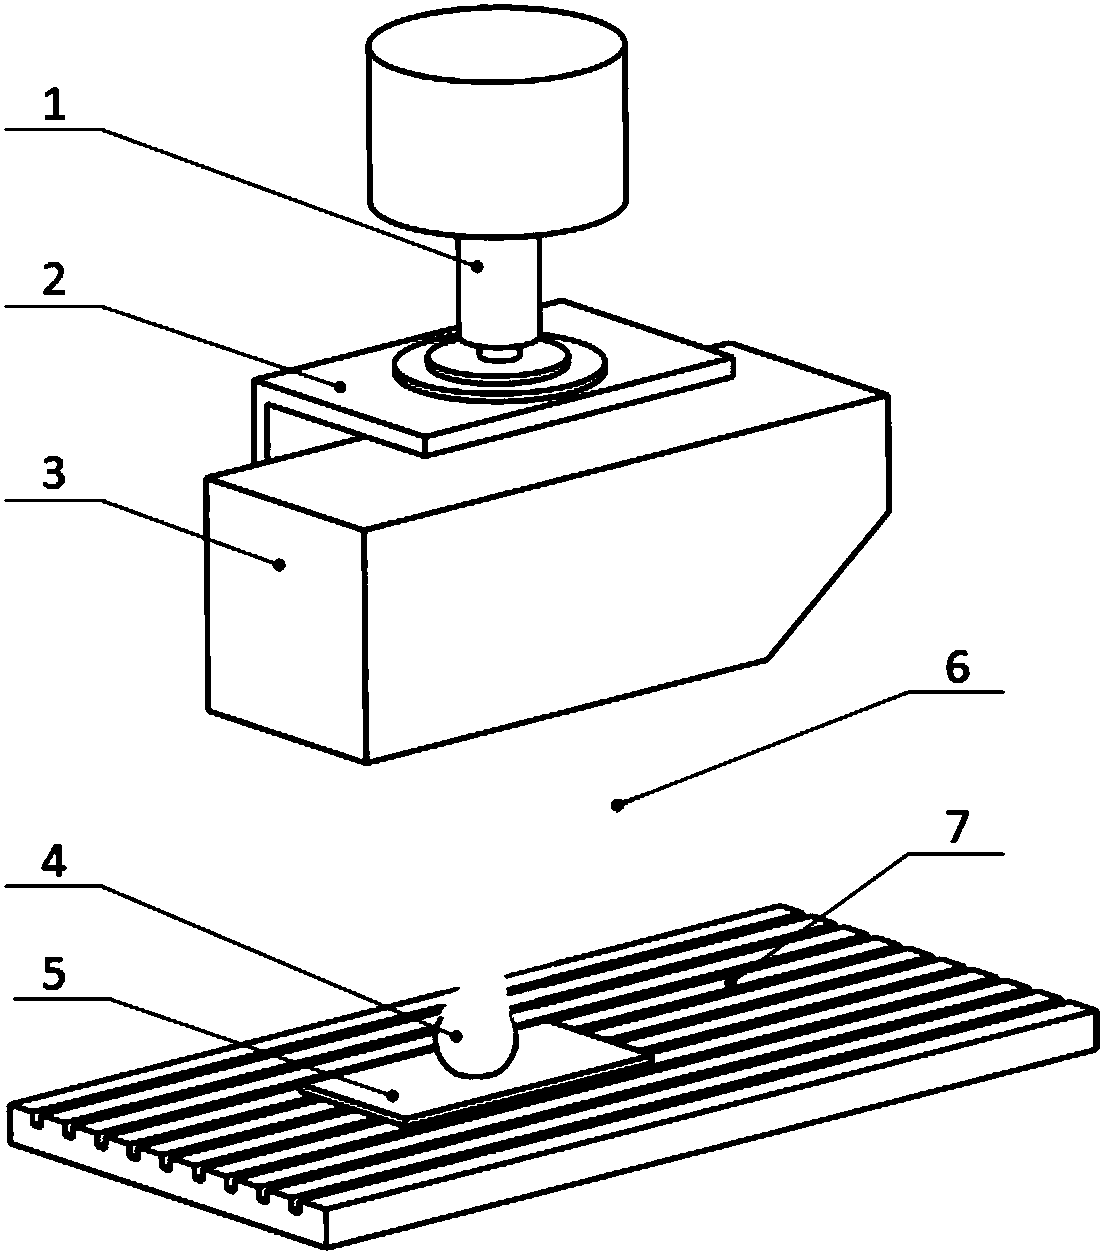 Coordinate Calibration Method of Machine Tool Follow-up Laser Scanning Based on Spatial Standard Sphere